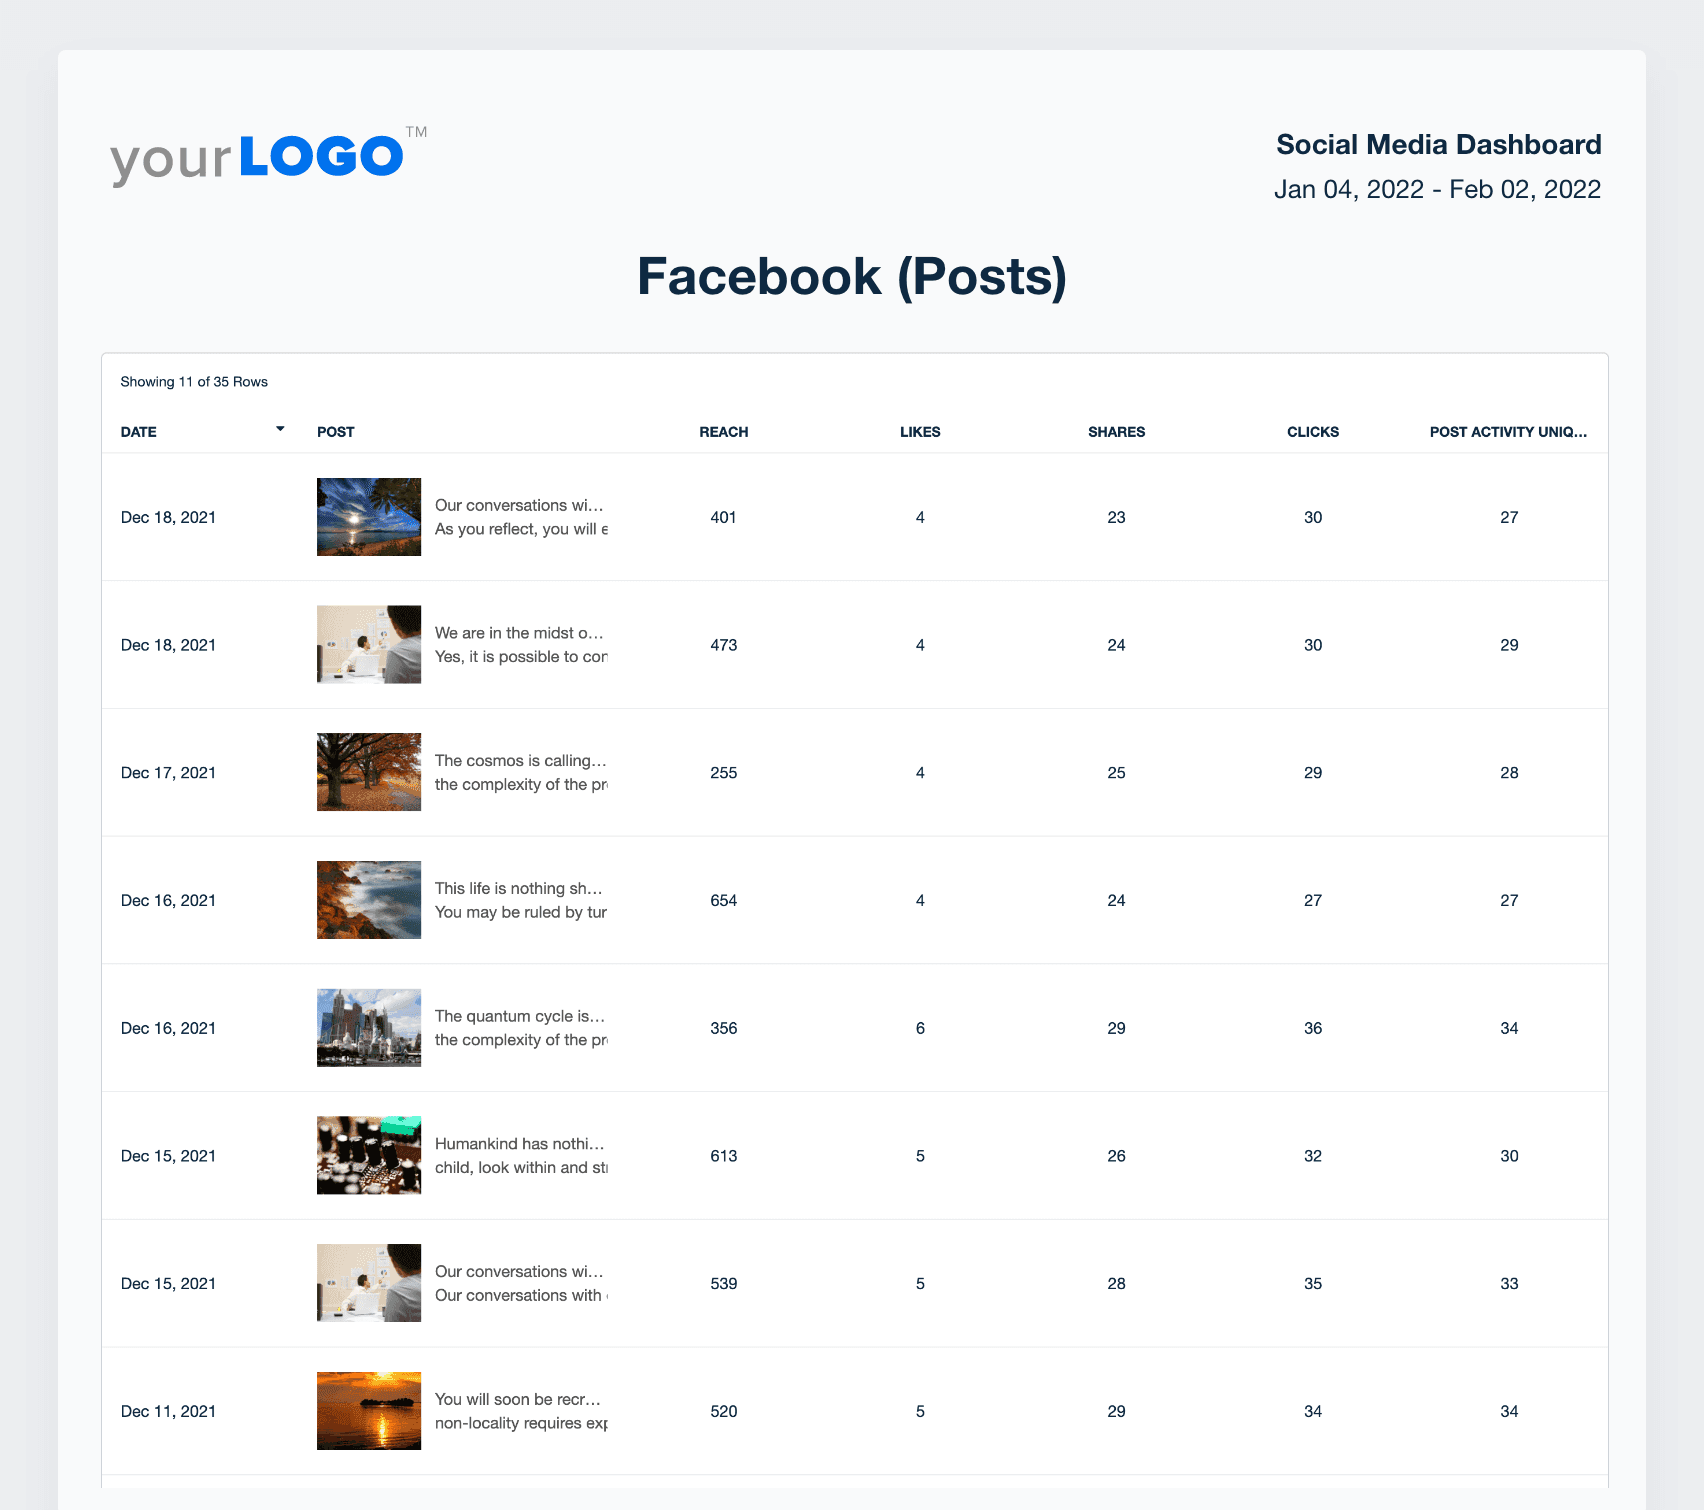 An example of the Facebook post data report